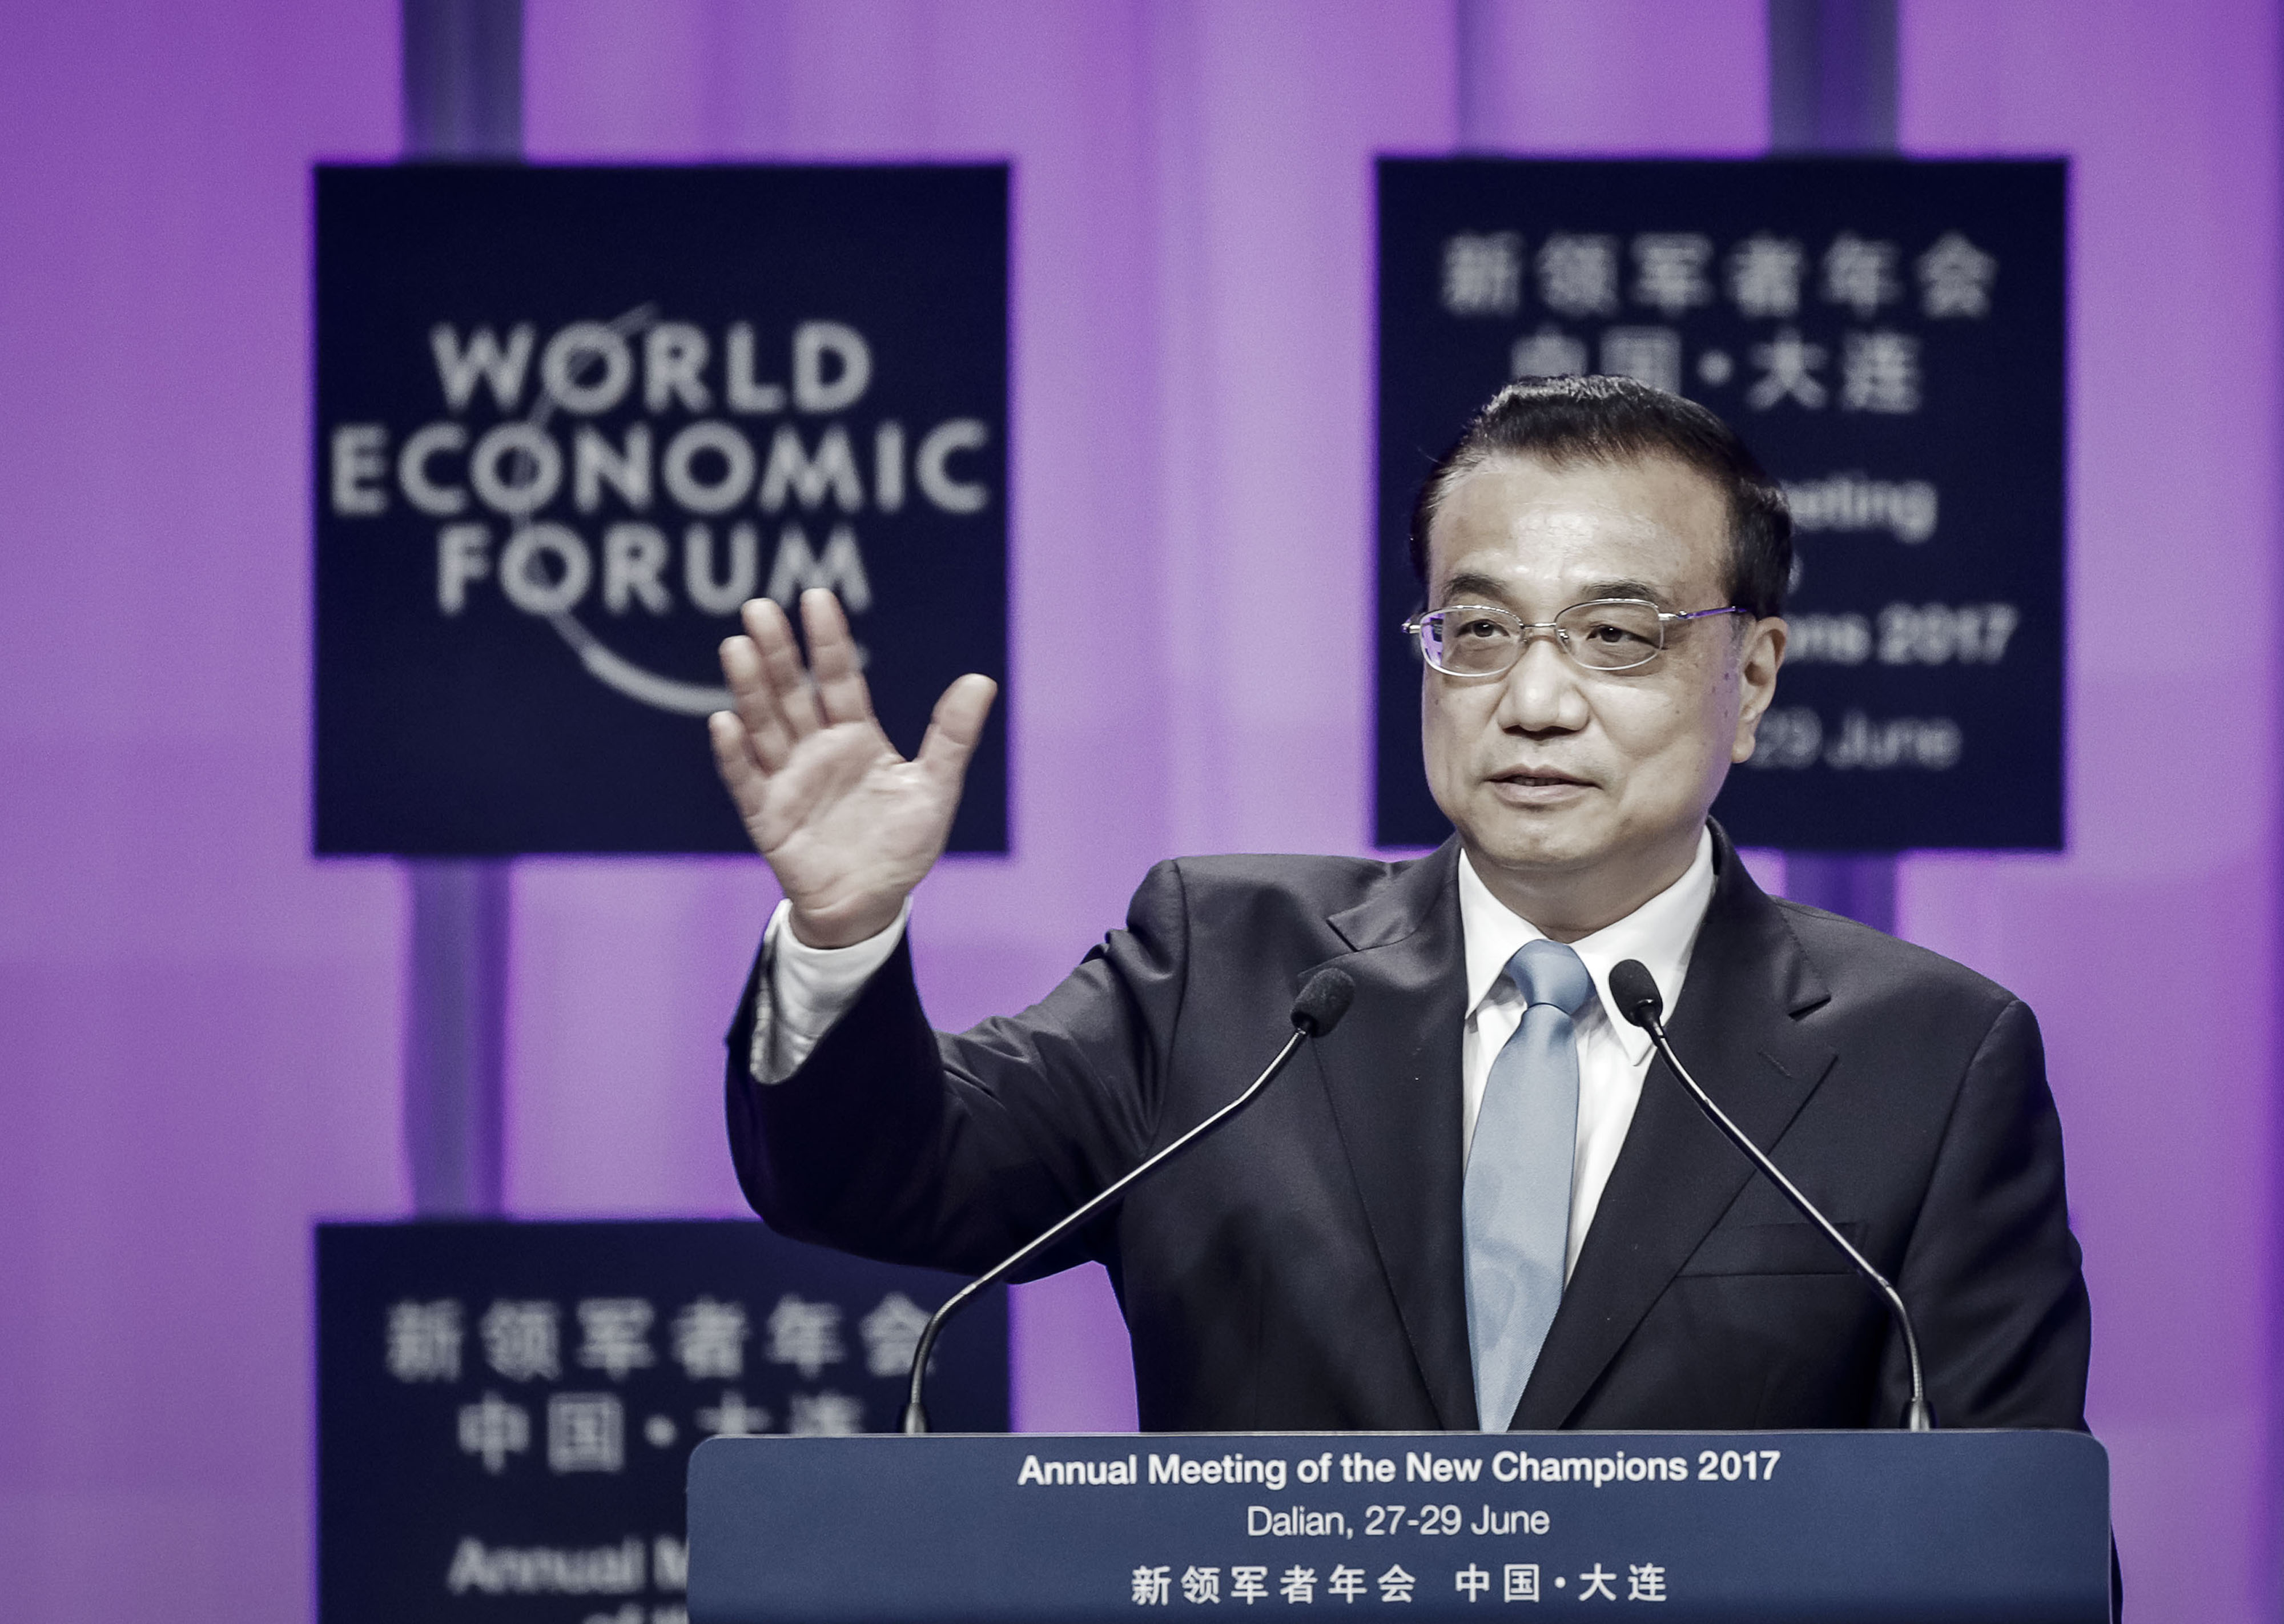 Chinese Premier Li Keqiang at the World Economic Forum in Dalian, China, on June 27, 2017. (Qilai Shen—Bloomberg/Getty Images)